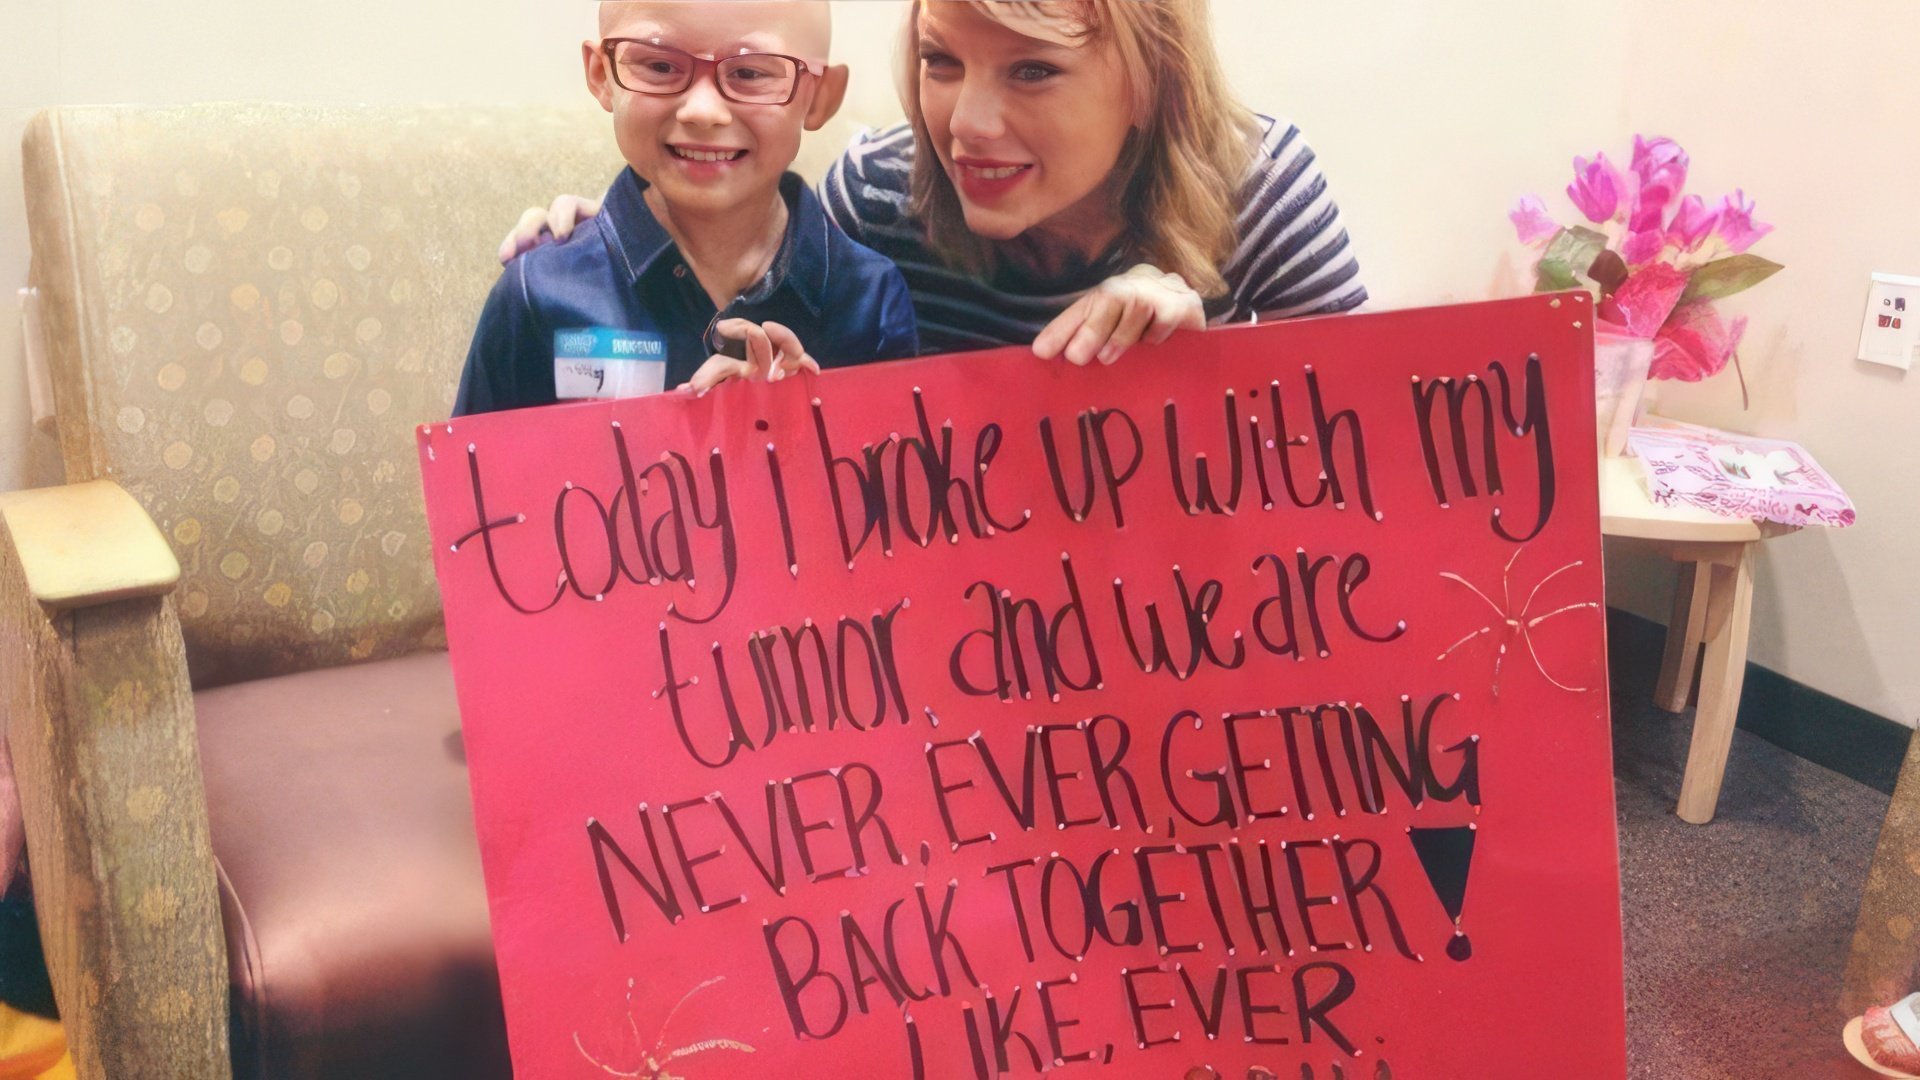 Taylor Swift is engaged in charity and helps sick children